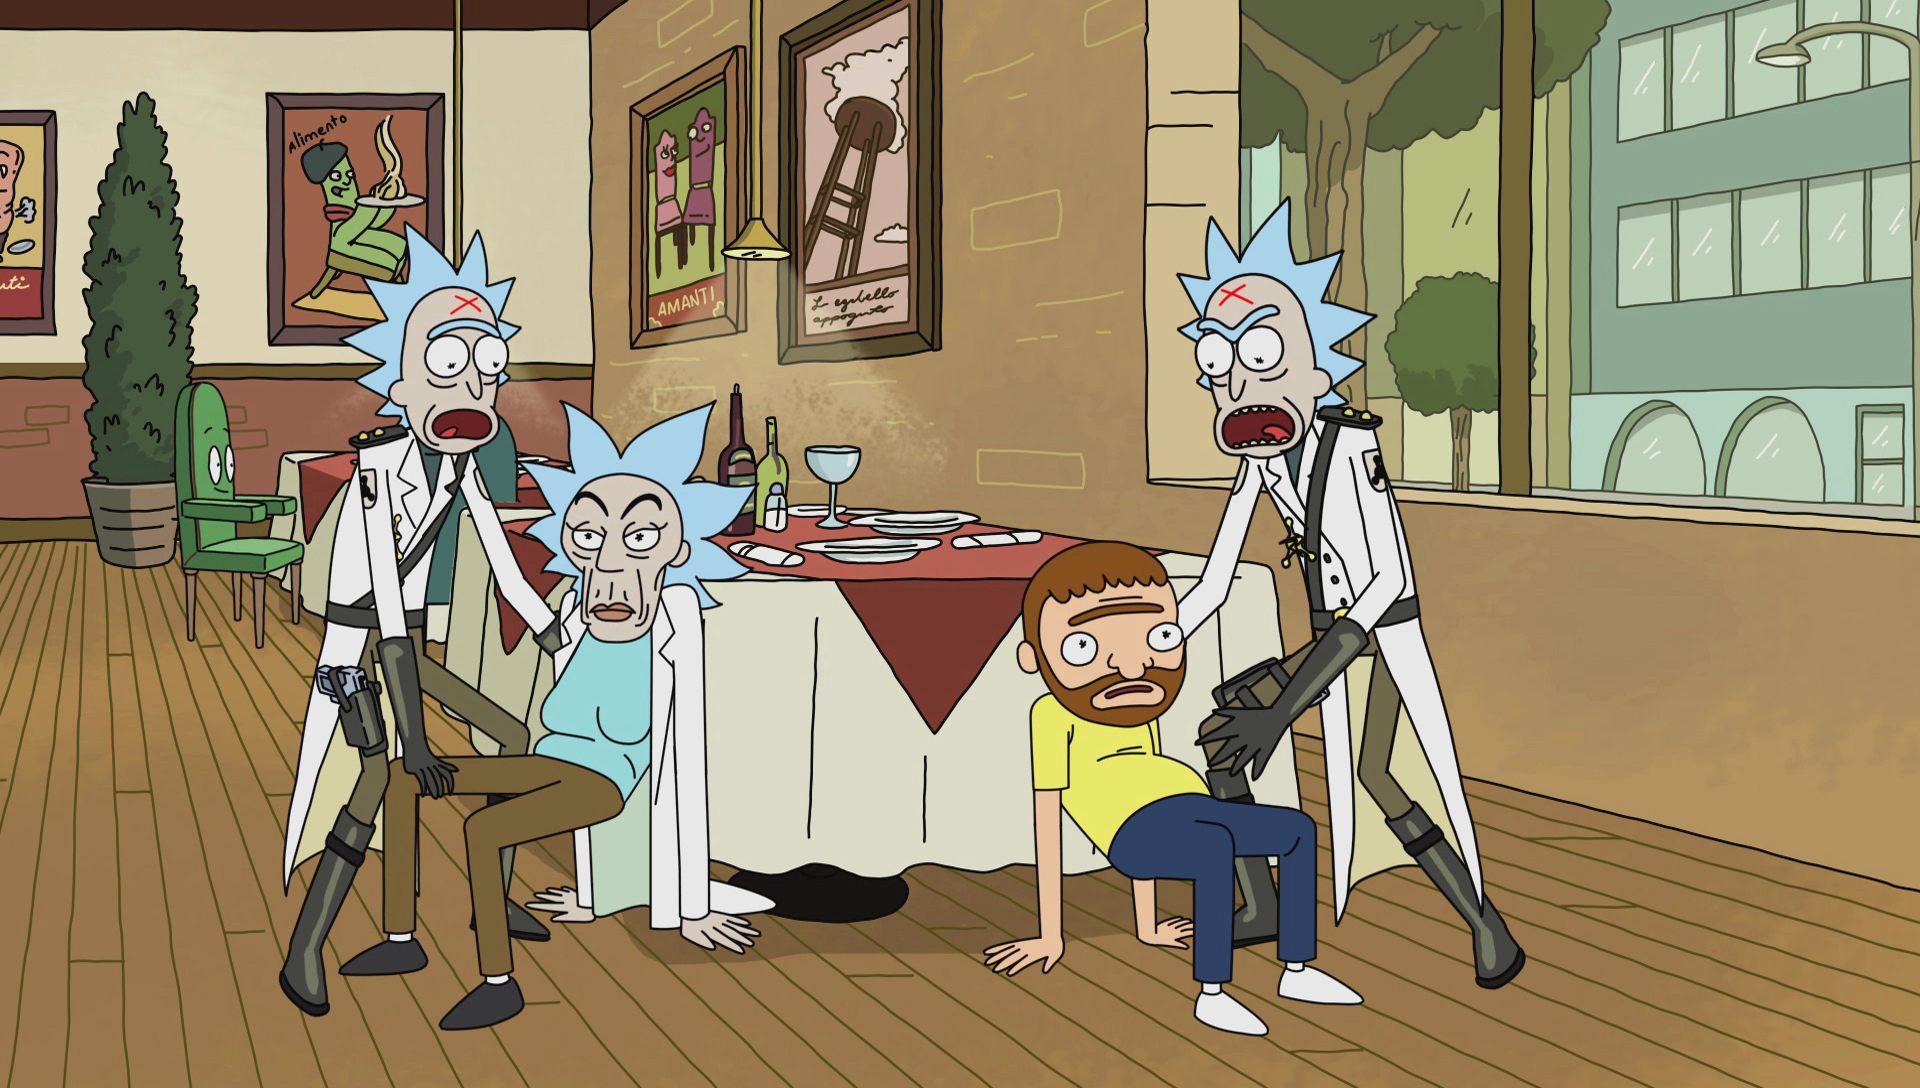 Woman Rick is a Rick character who appeared in the episode Close Rick-count...